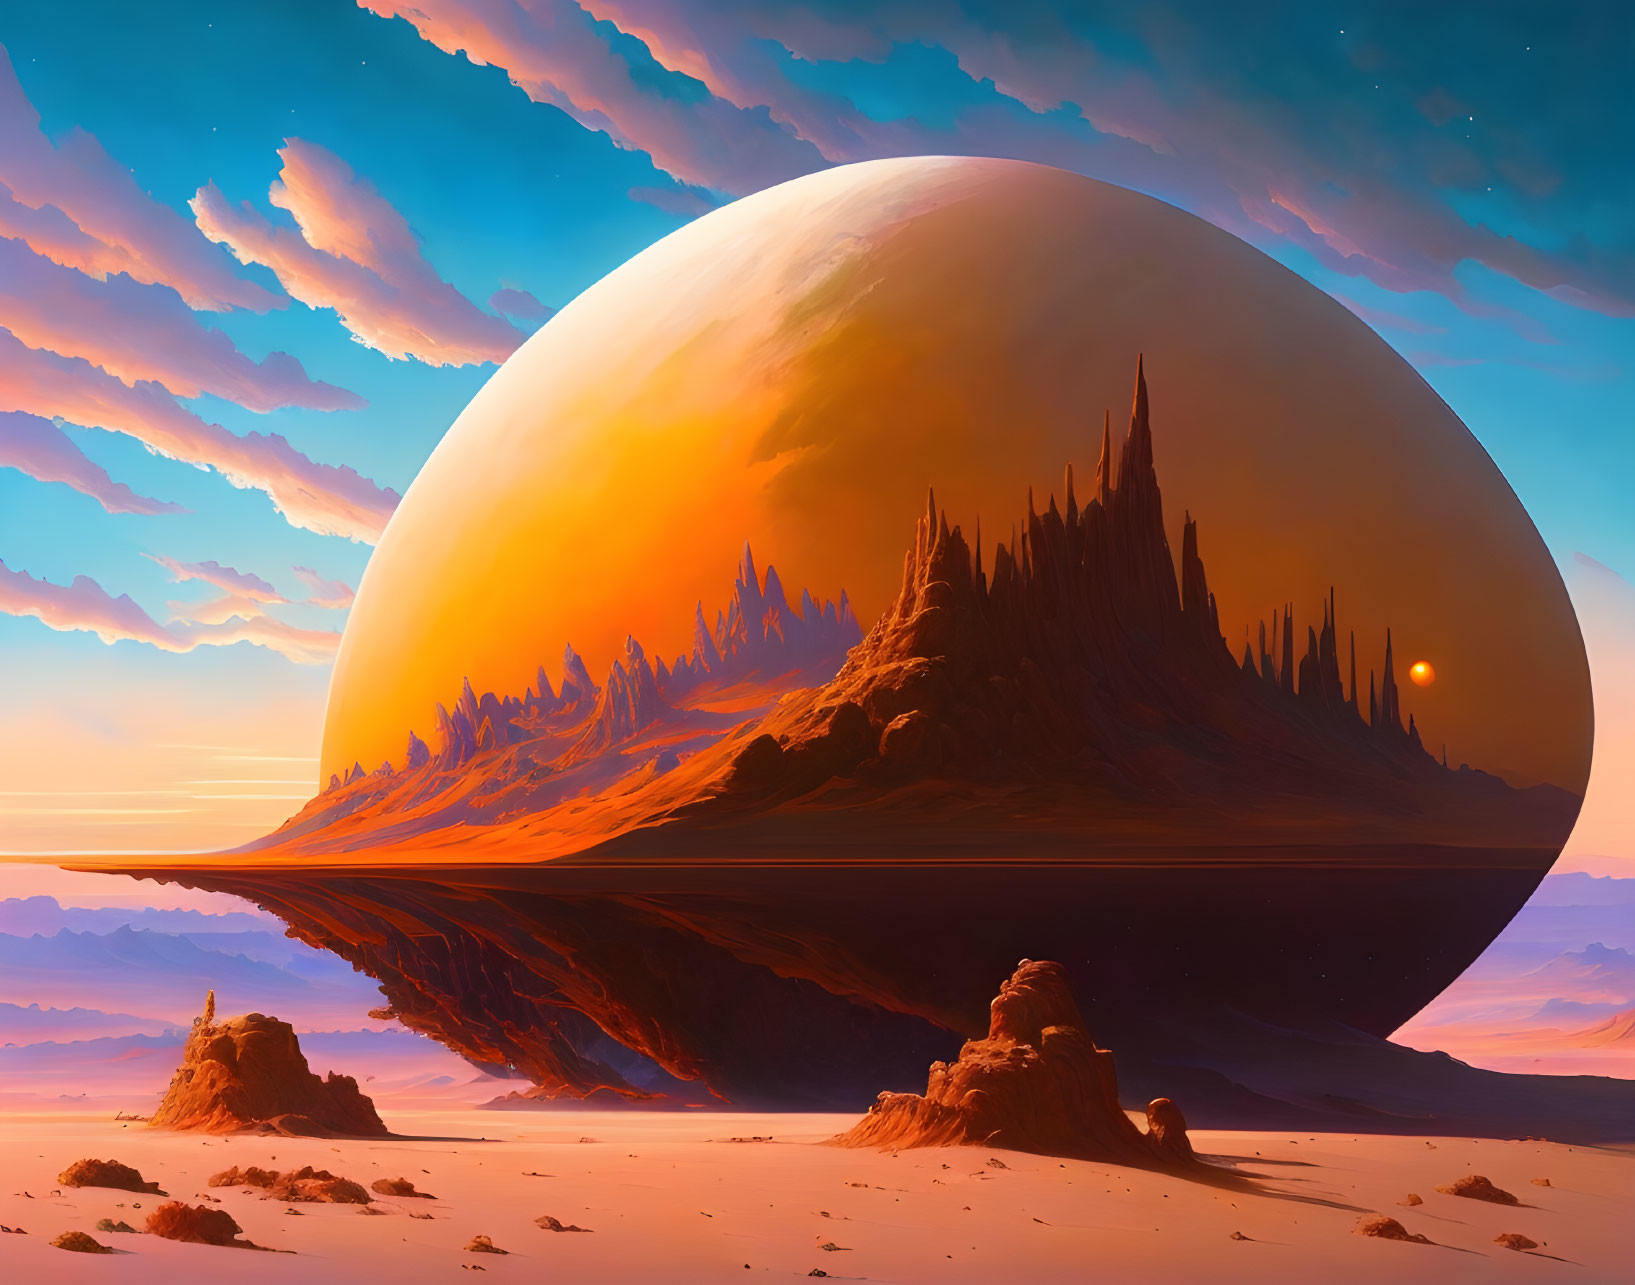 Surreal landscape with immense planet over desert and rock formations